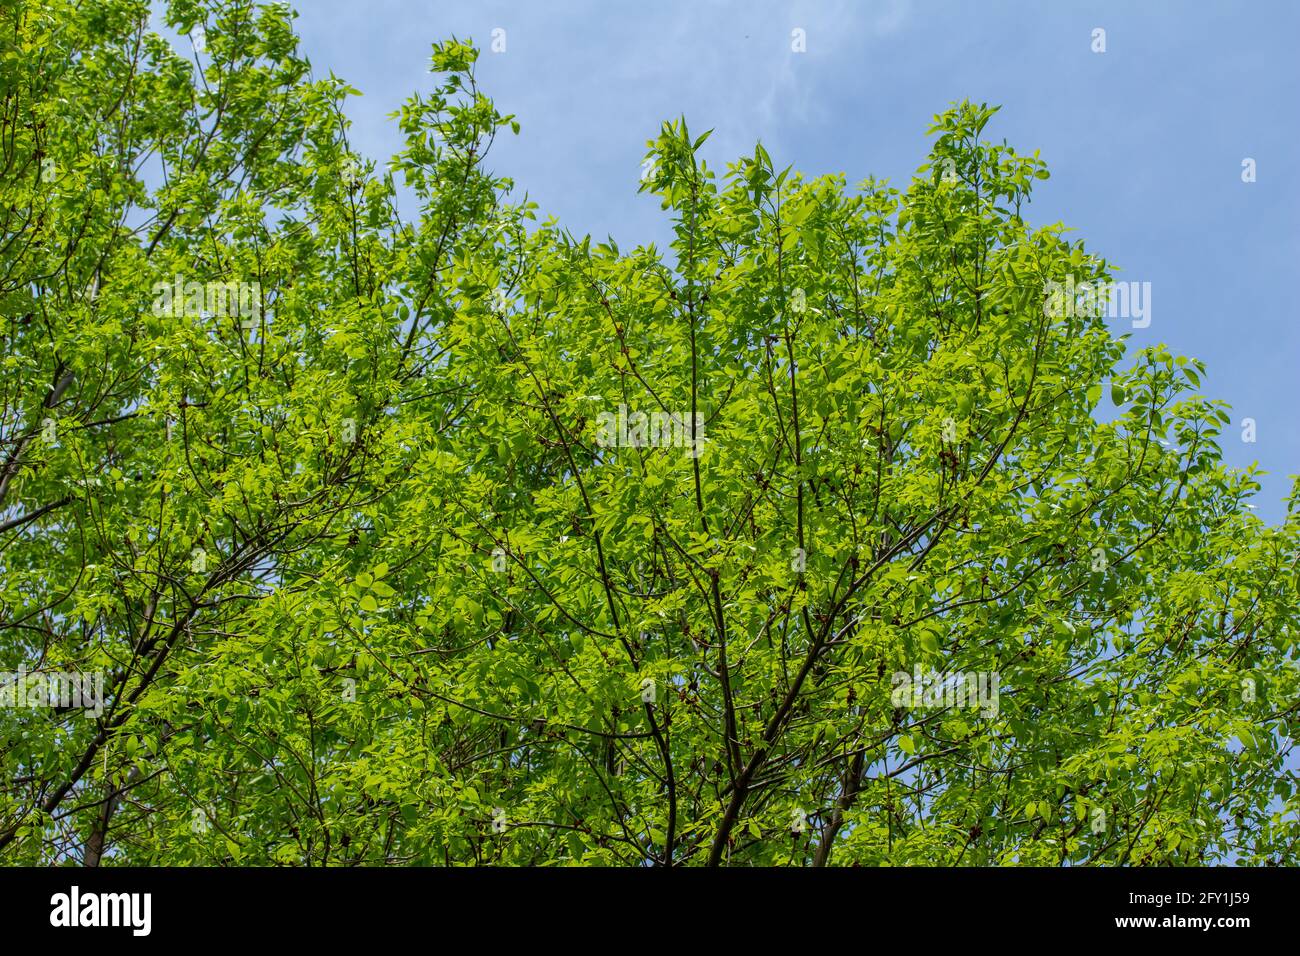 Low angle view of a green ash (fraxinus pennsylvanica) treetop covered with leaves, and blue sky background Stock Photo